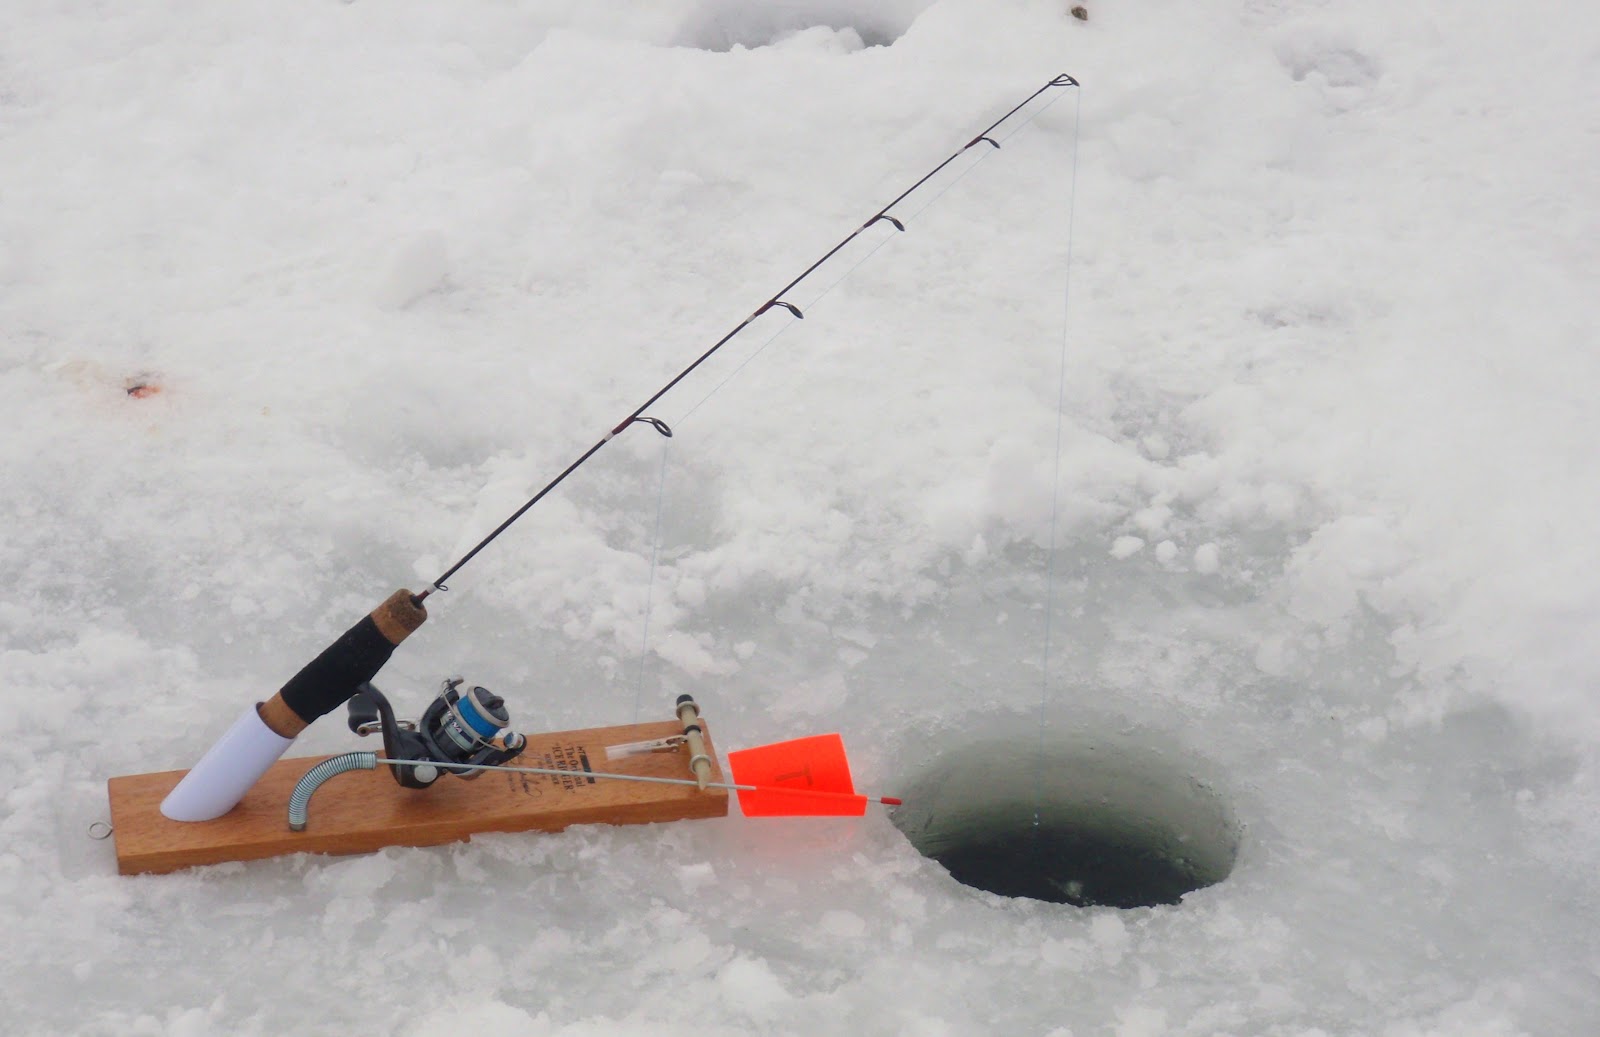 Bass Junkies Fishing Addiction: On the Ice: Dead stickin' for Splake